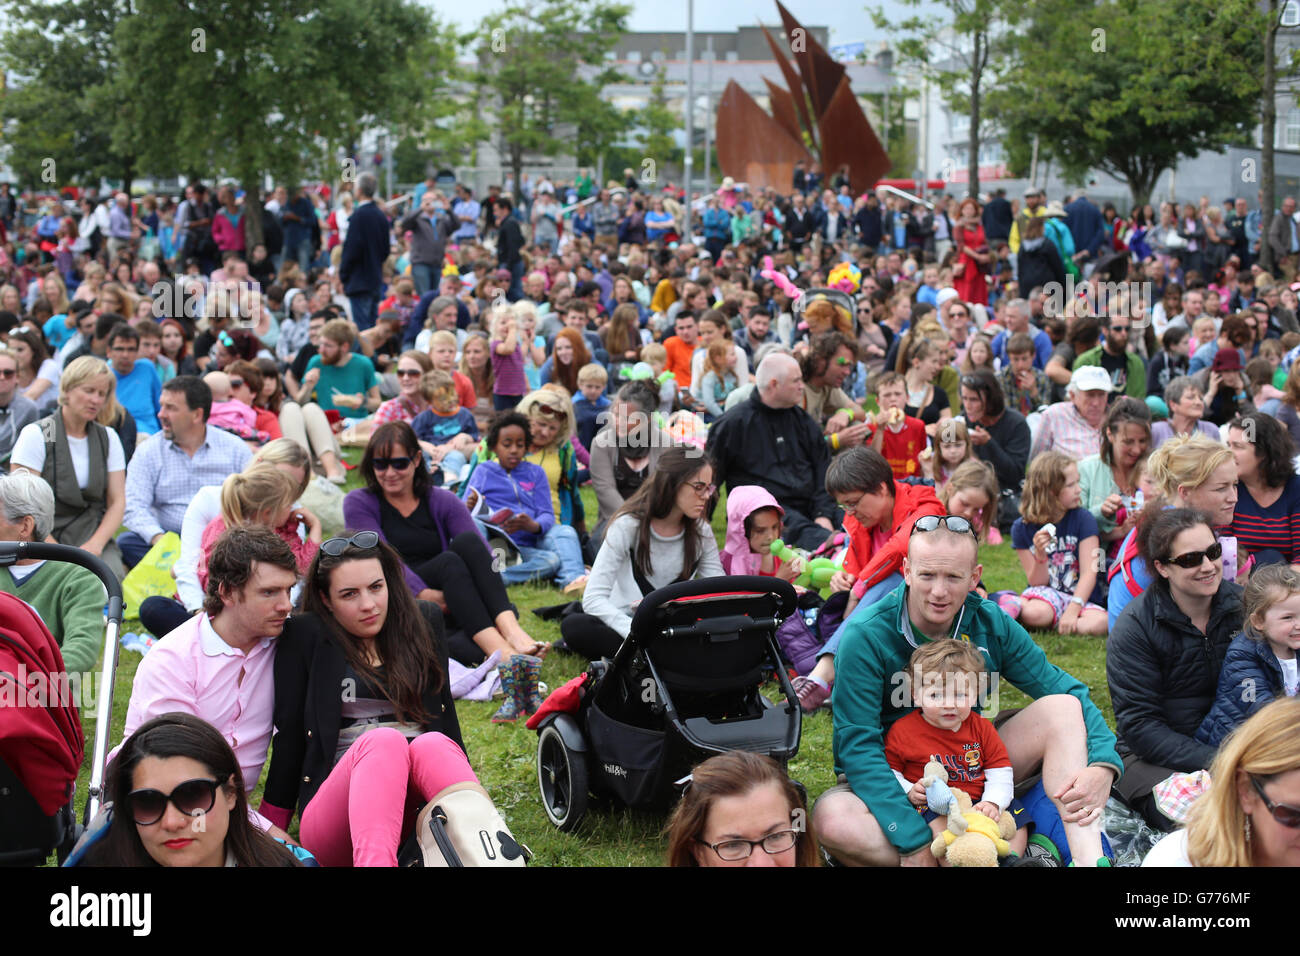 Crowds watch the outdoor acrobatic theater show, HALLALI part of Galway International Arts Festival in the cities Eyre Square tonight. Stock Photo